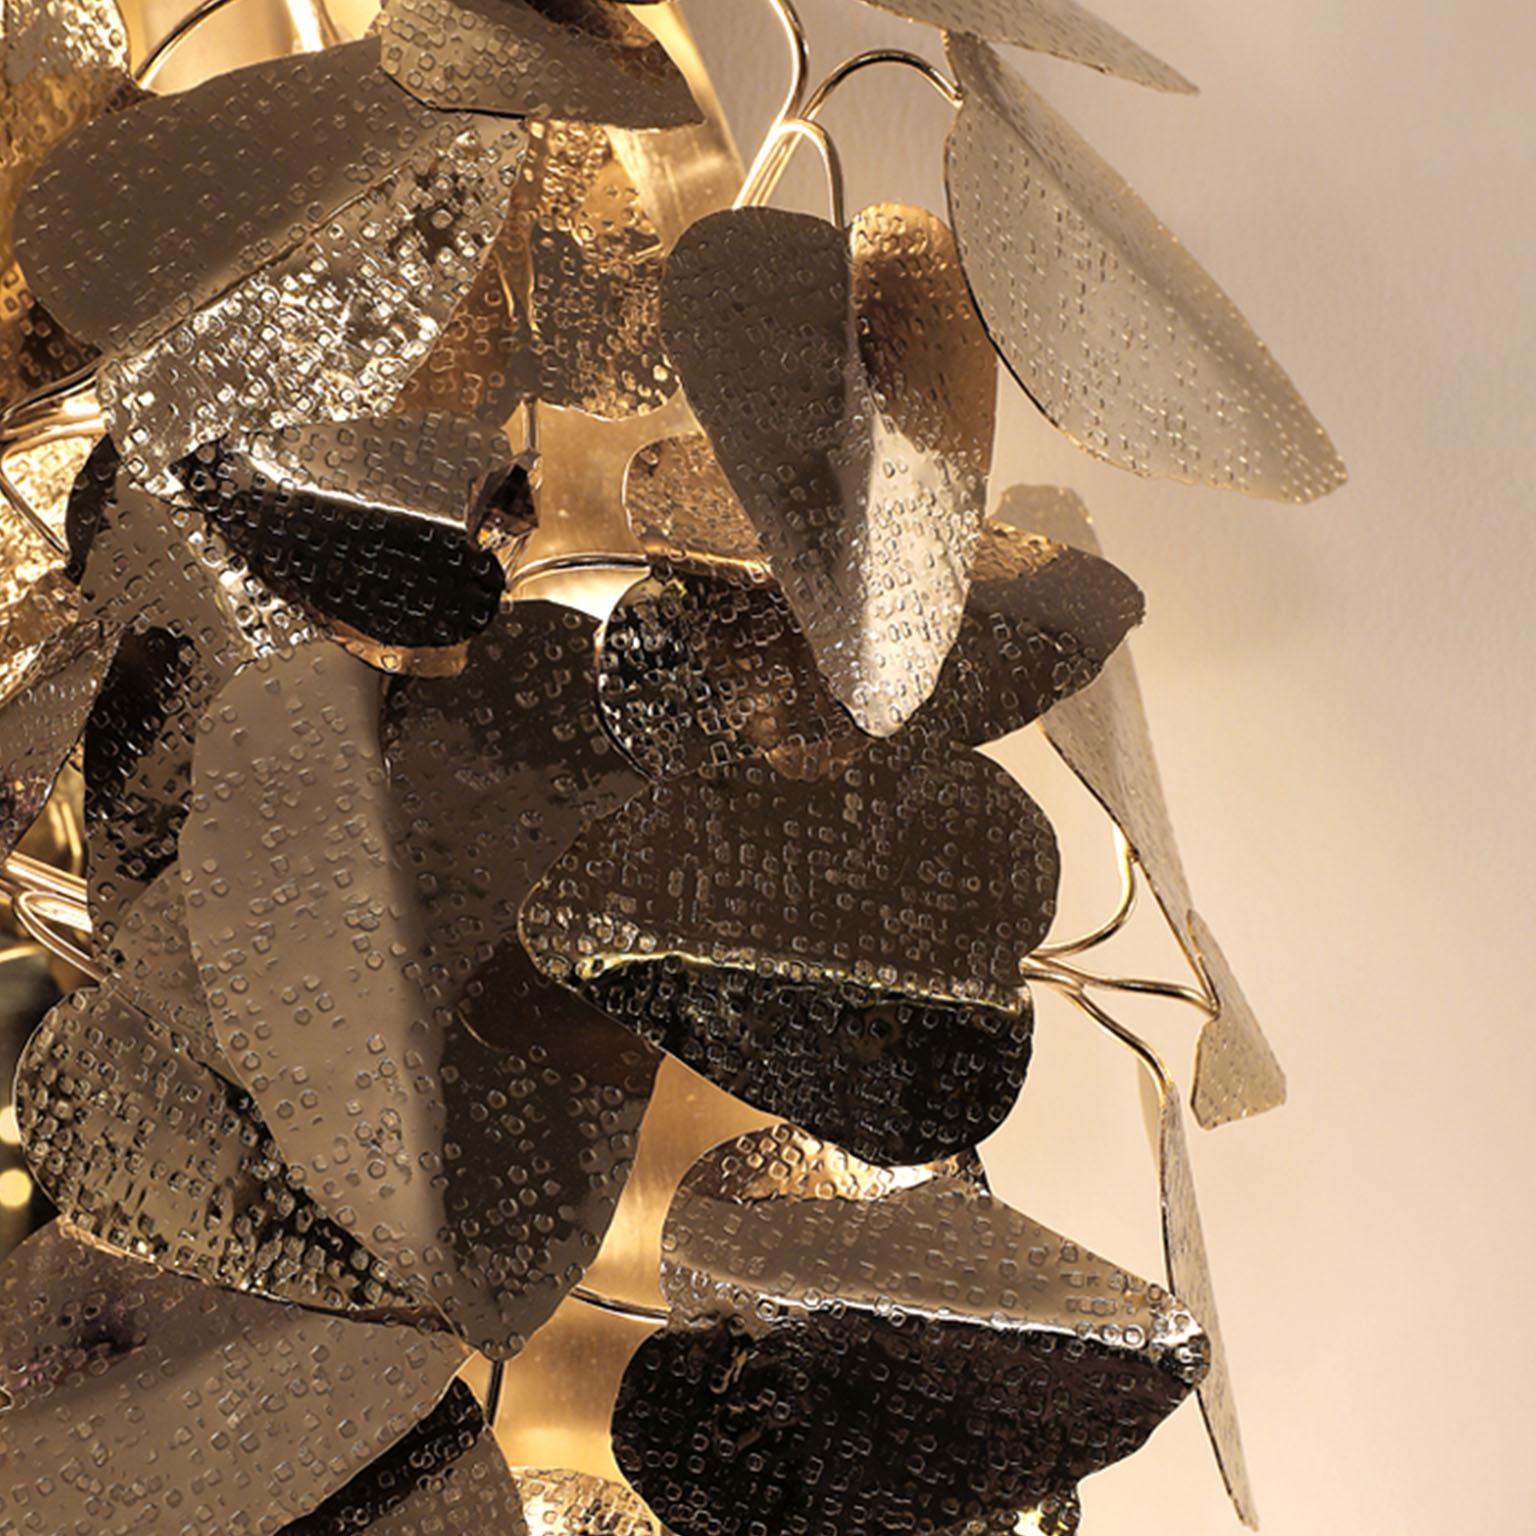 Made in brass with gold plated, handmade butterflies and majestic flowers, ending with the touch of the beautiful Swarovski crystals. The wall version of McQueen Chandelier evokes a dramatic and eccentric sensation of beauty.

MATERIALS
Body: Brass